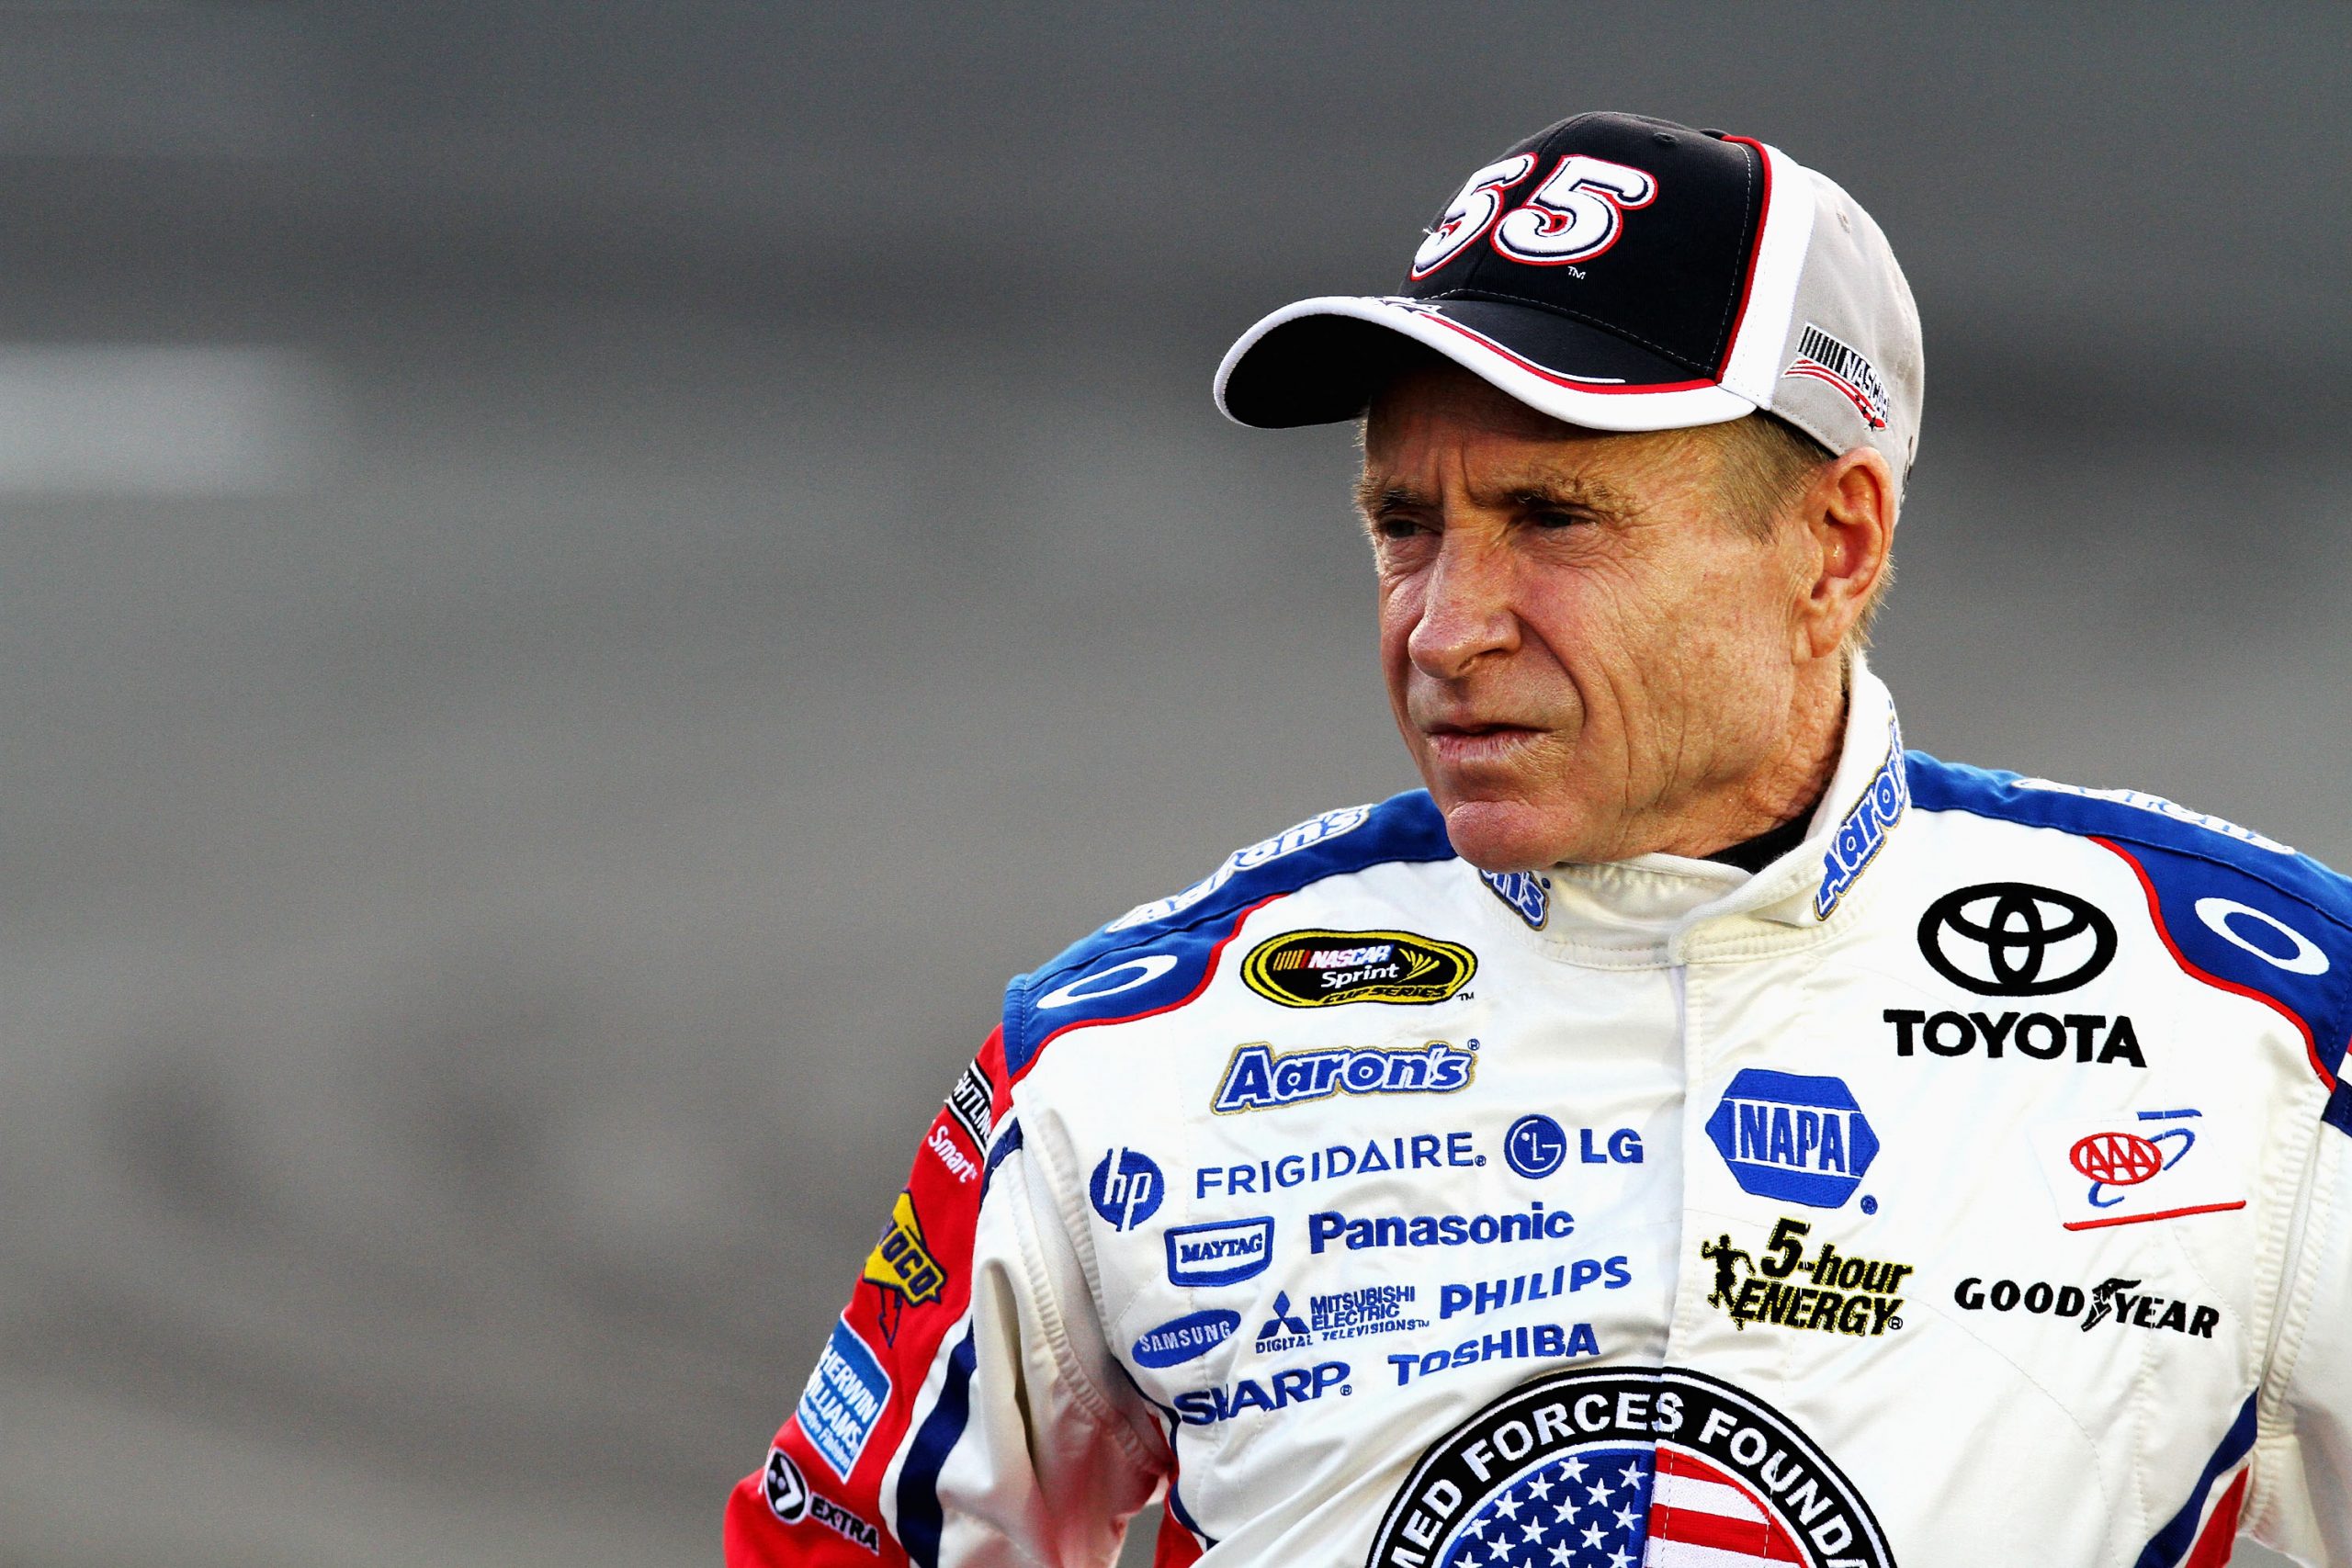 Mark Martin remains far away from NASCAR after his retirement in 2013.